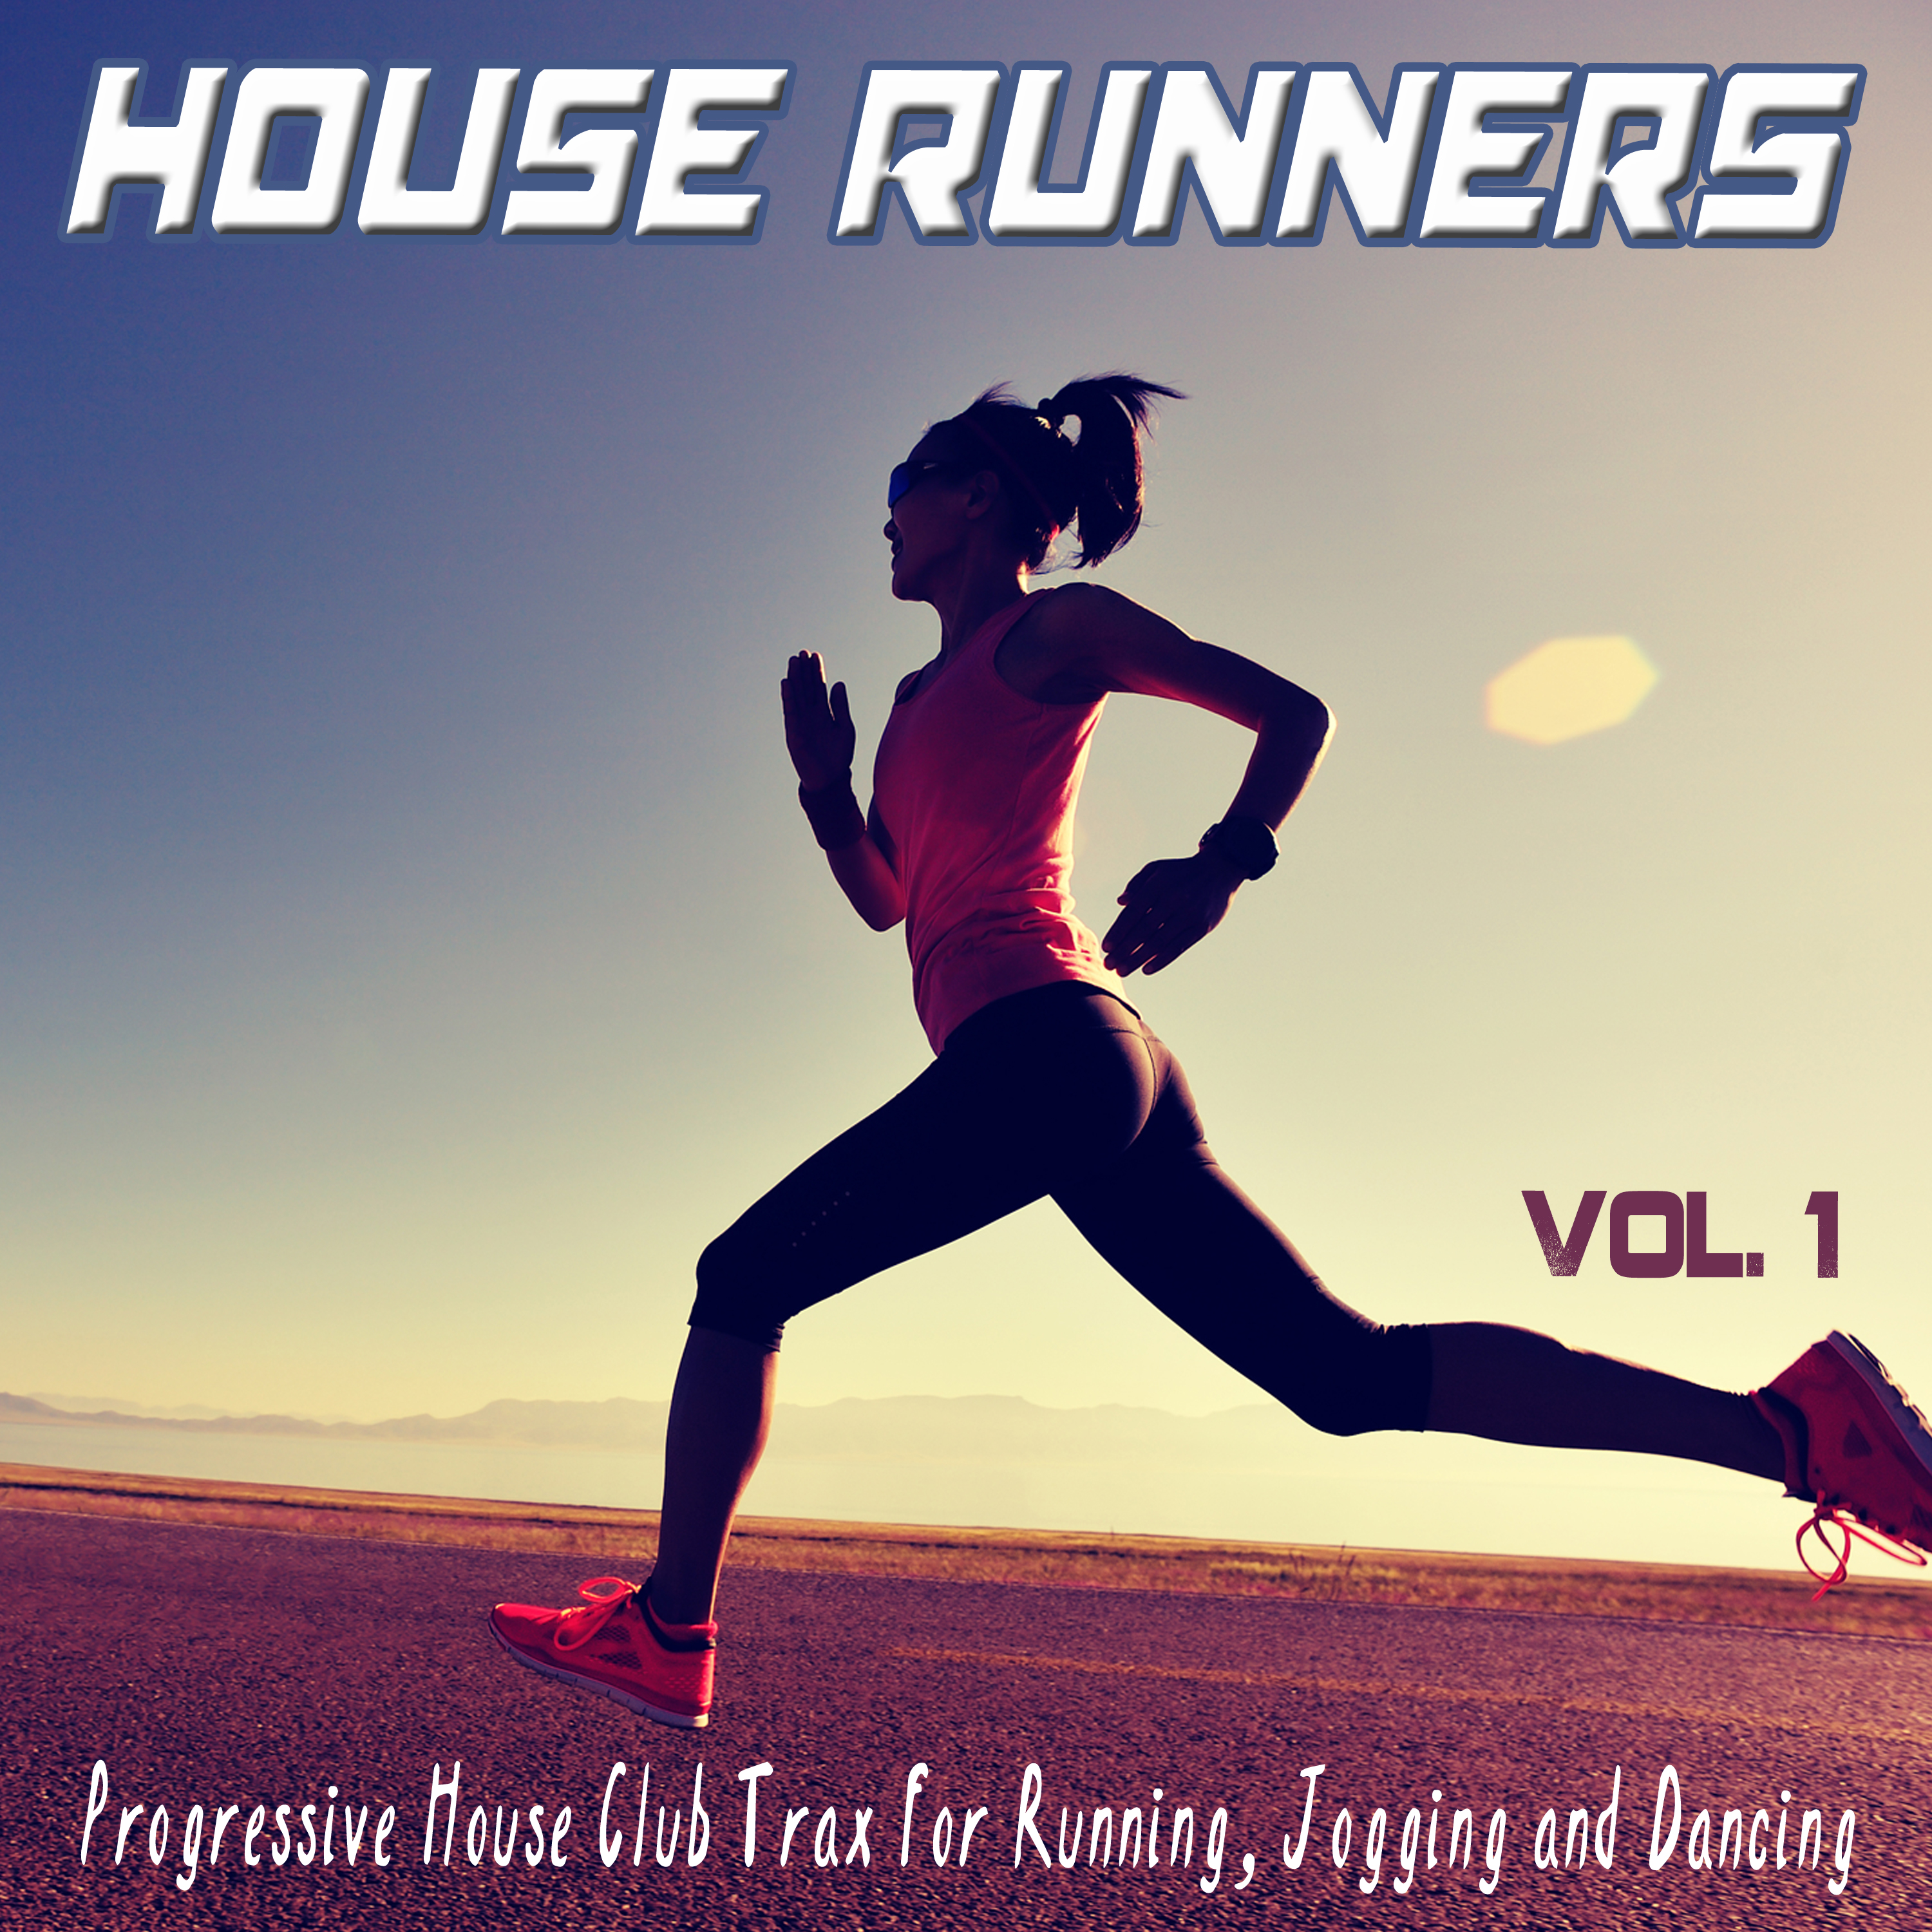 House Runners, Vol. 1 - Progressive House Club Trax for Running, Jogging and Dancing